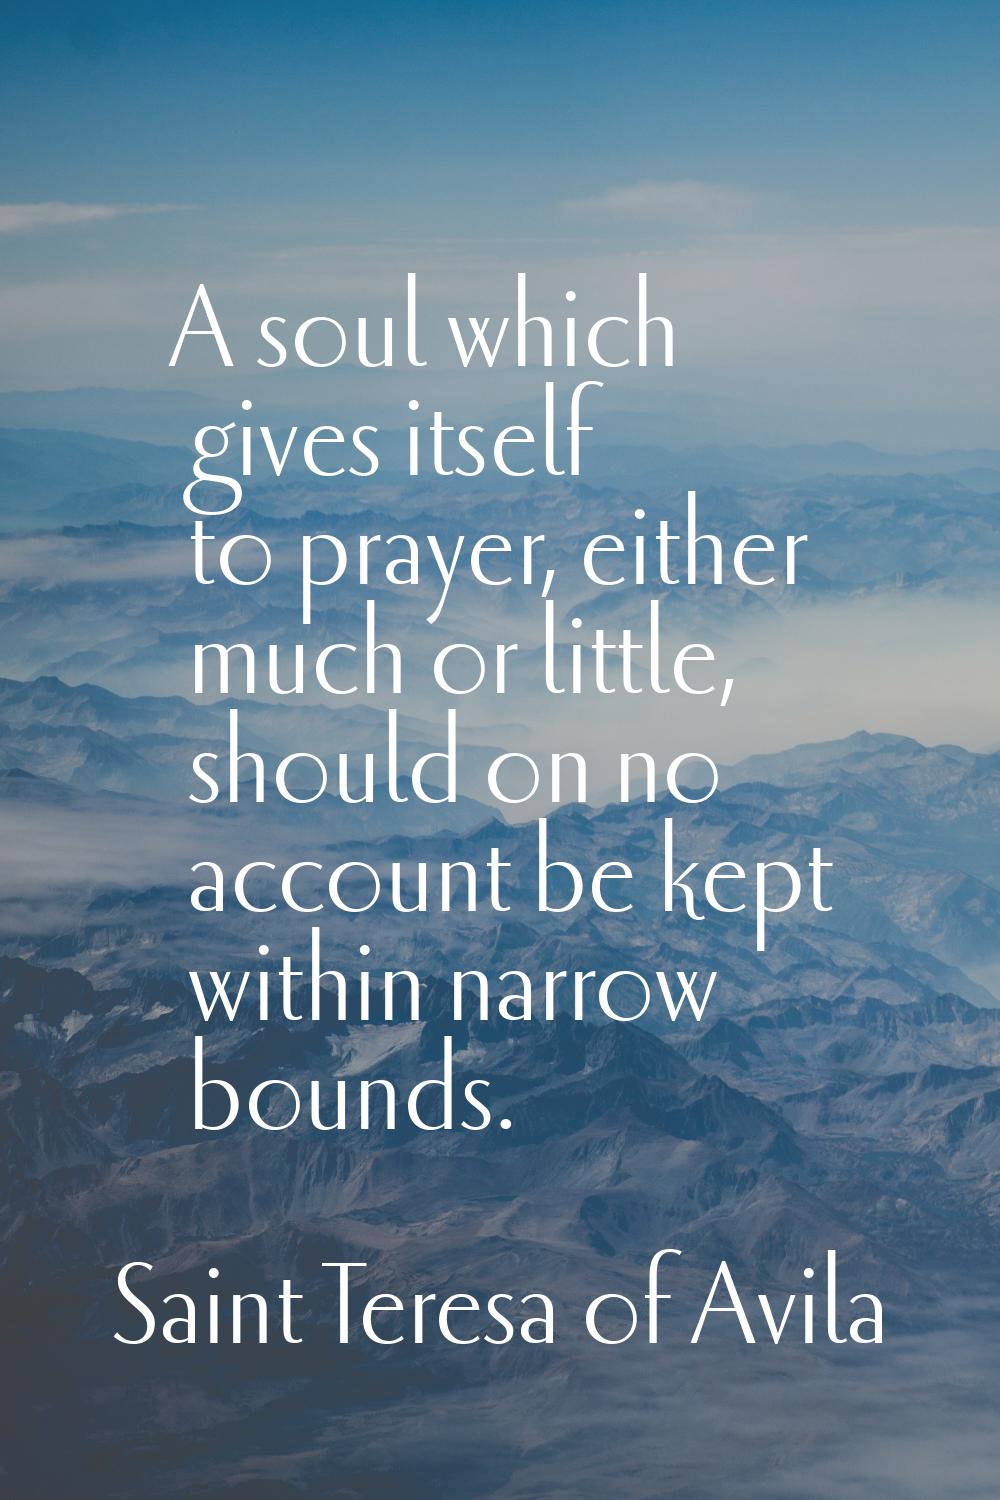 A soul which gives itself to prayer, either much or little, should on no account be kept within nar